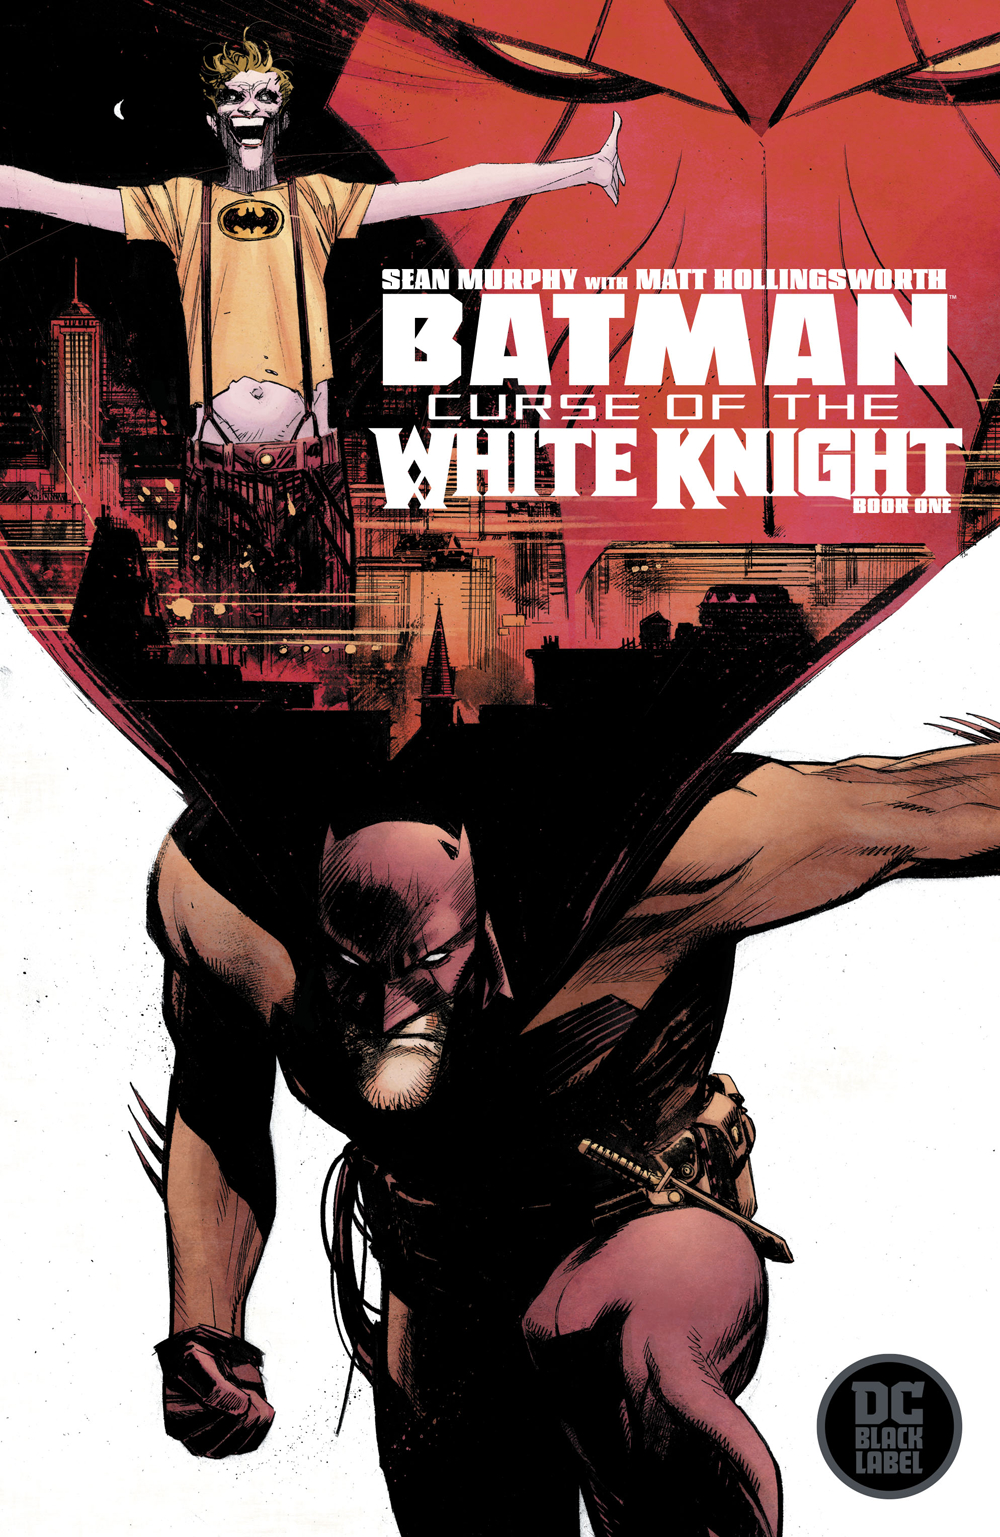 Batman: Curse of the White Knight no. 1 (1 of 8) (2019 Series)